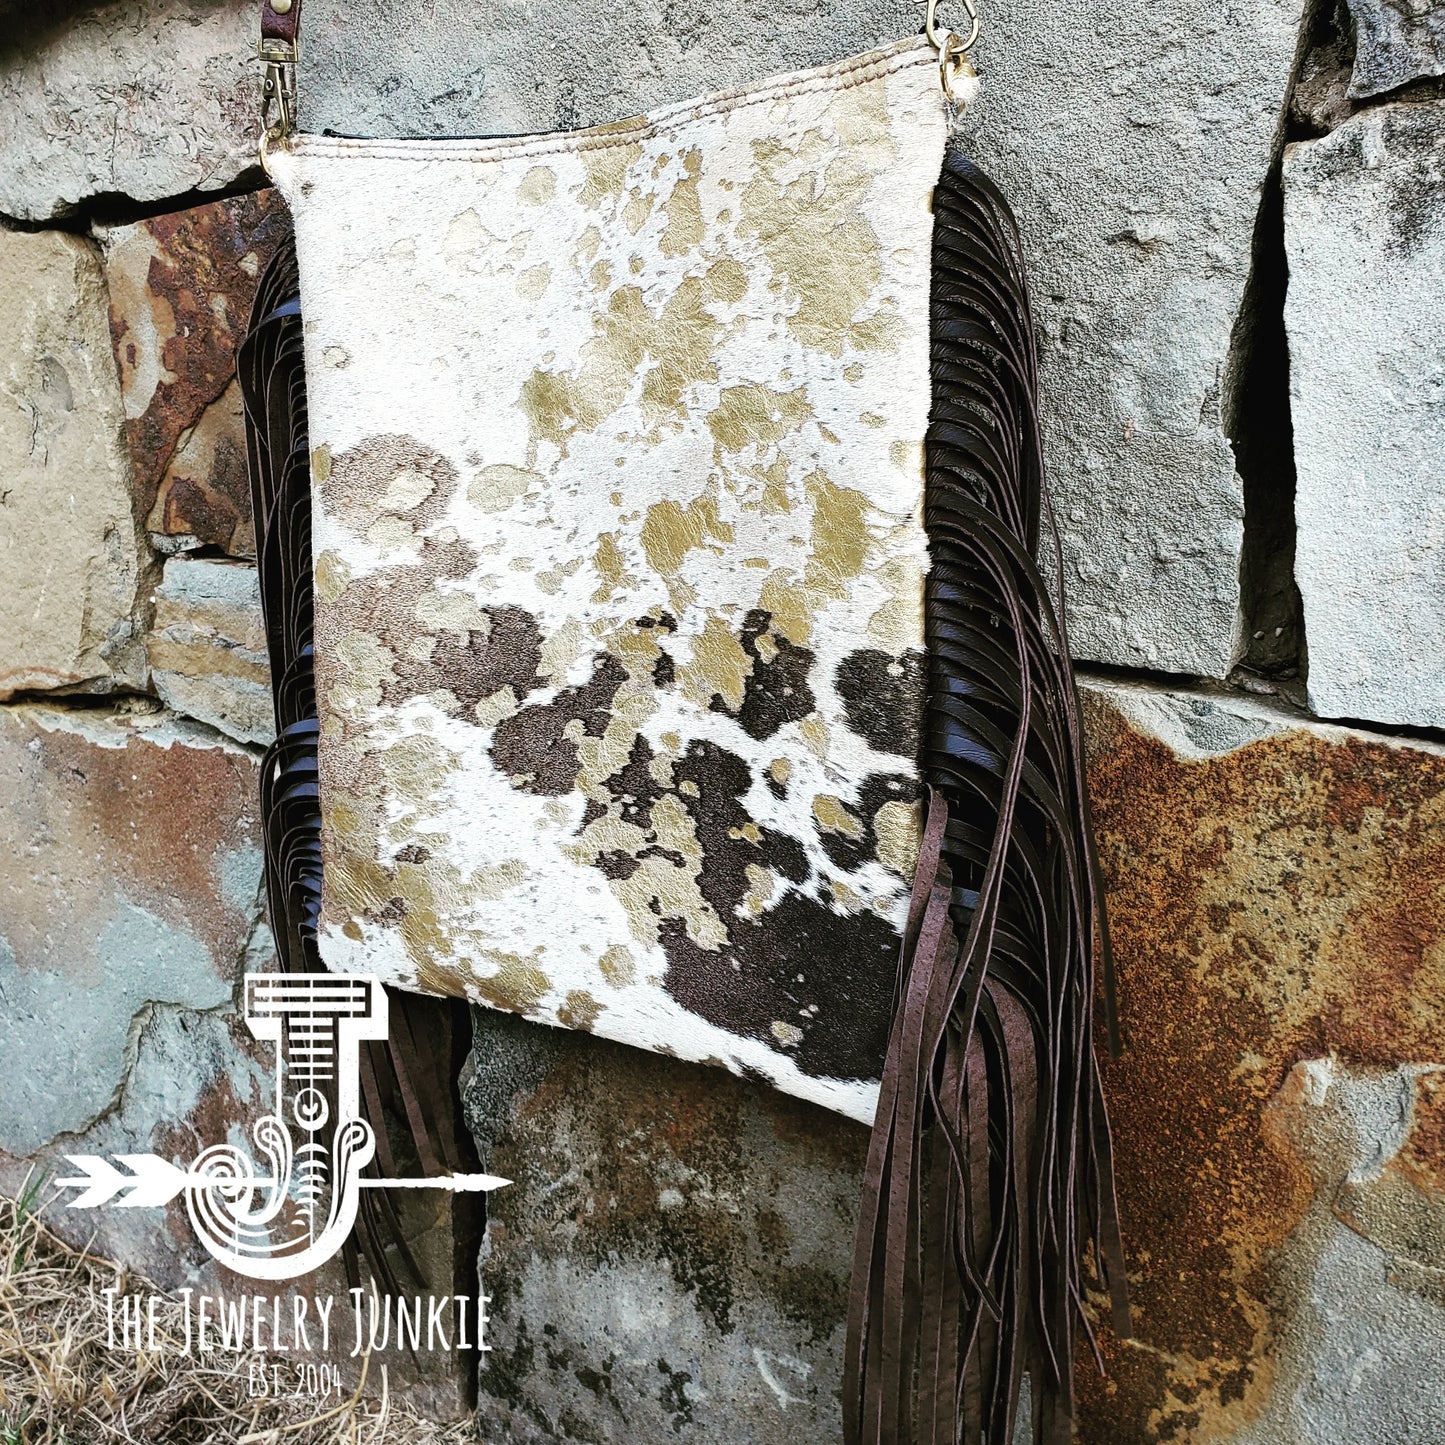 A Mixed Metallic Hair on Hide Handbag w/ Leather Fringe from Jewelry Junkie